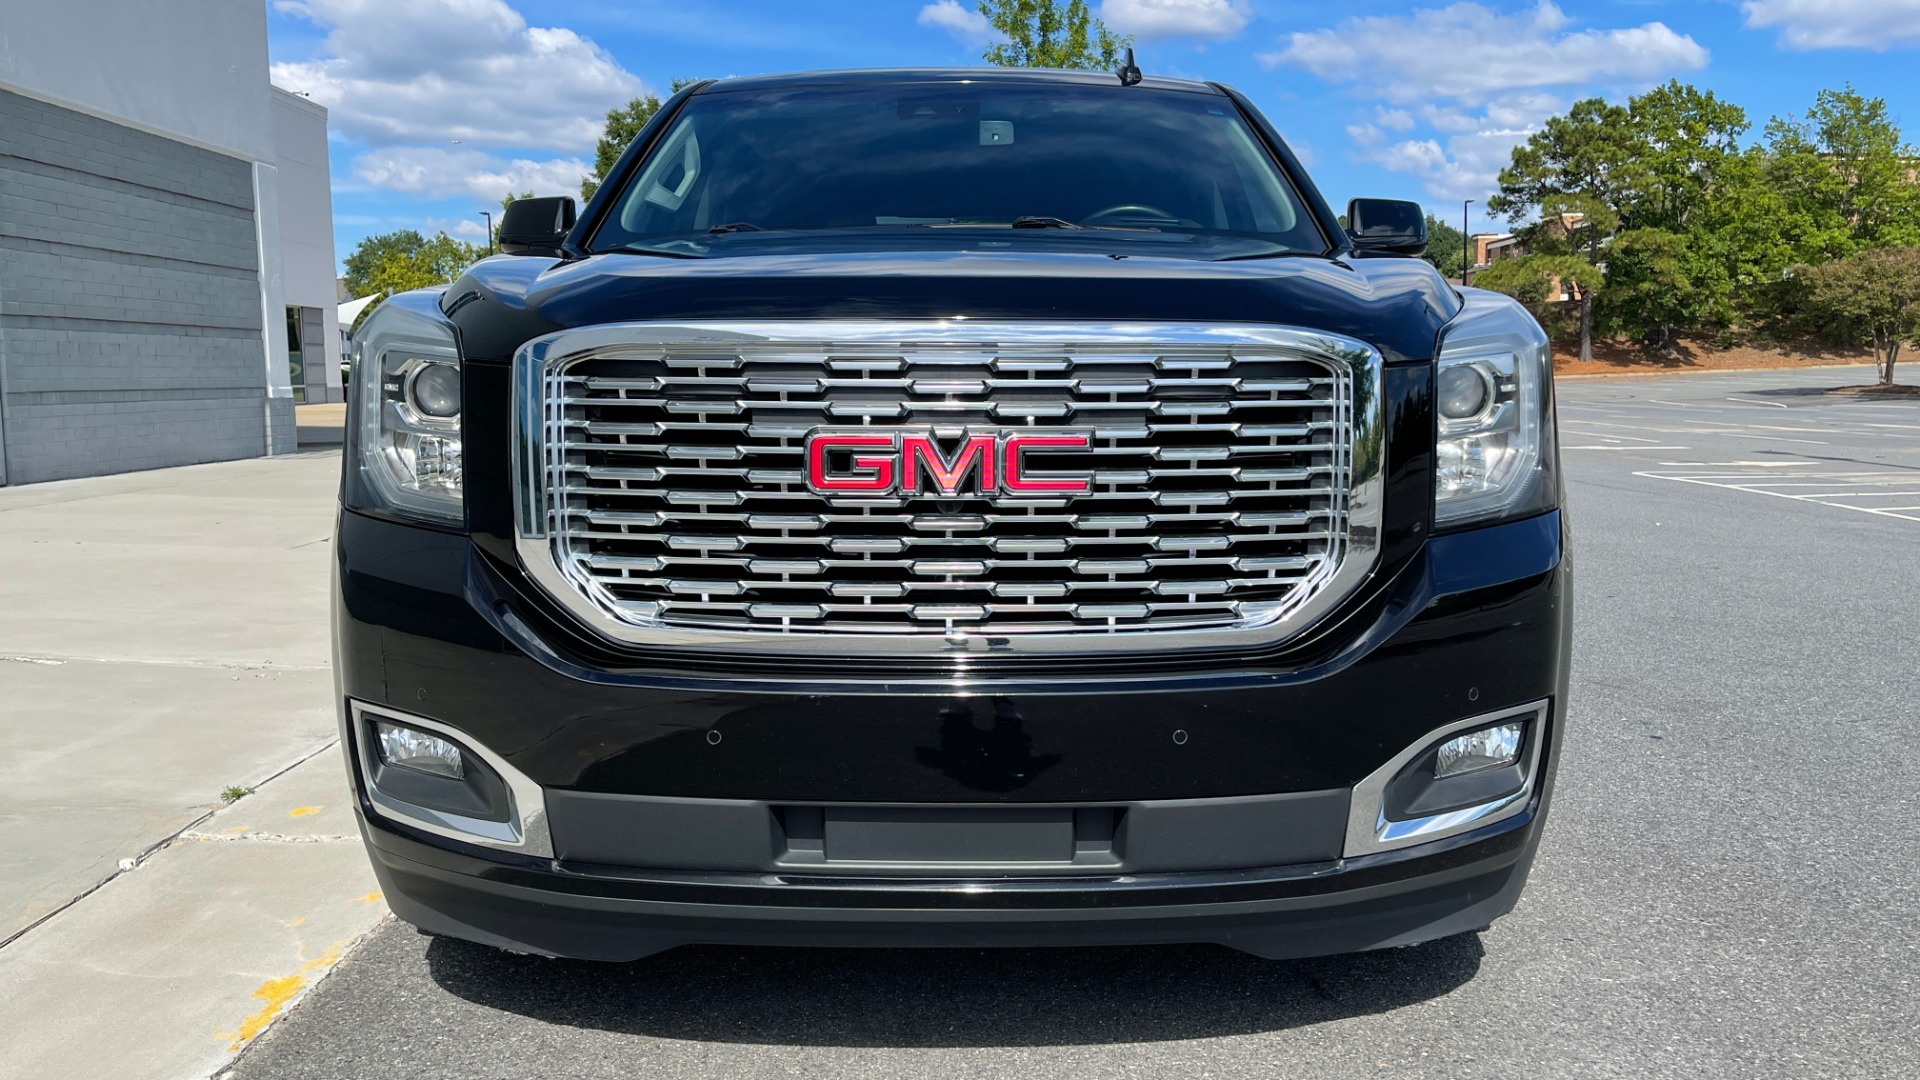 Used 2019 GMC Yukon DENALI / ULTIMATE PACKAGE / DVD / 4X4 / ADAPTIVE CRUISE / SUNROOF for sale $58,295 at Formula Imports in Charlotte NC 28227 8